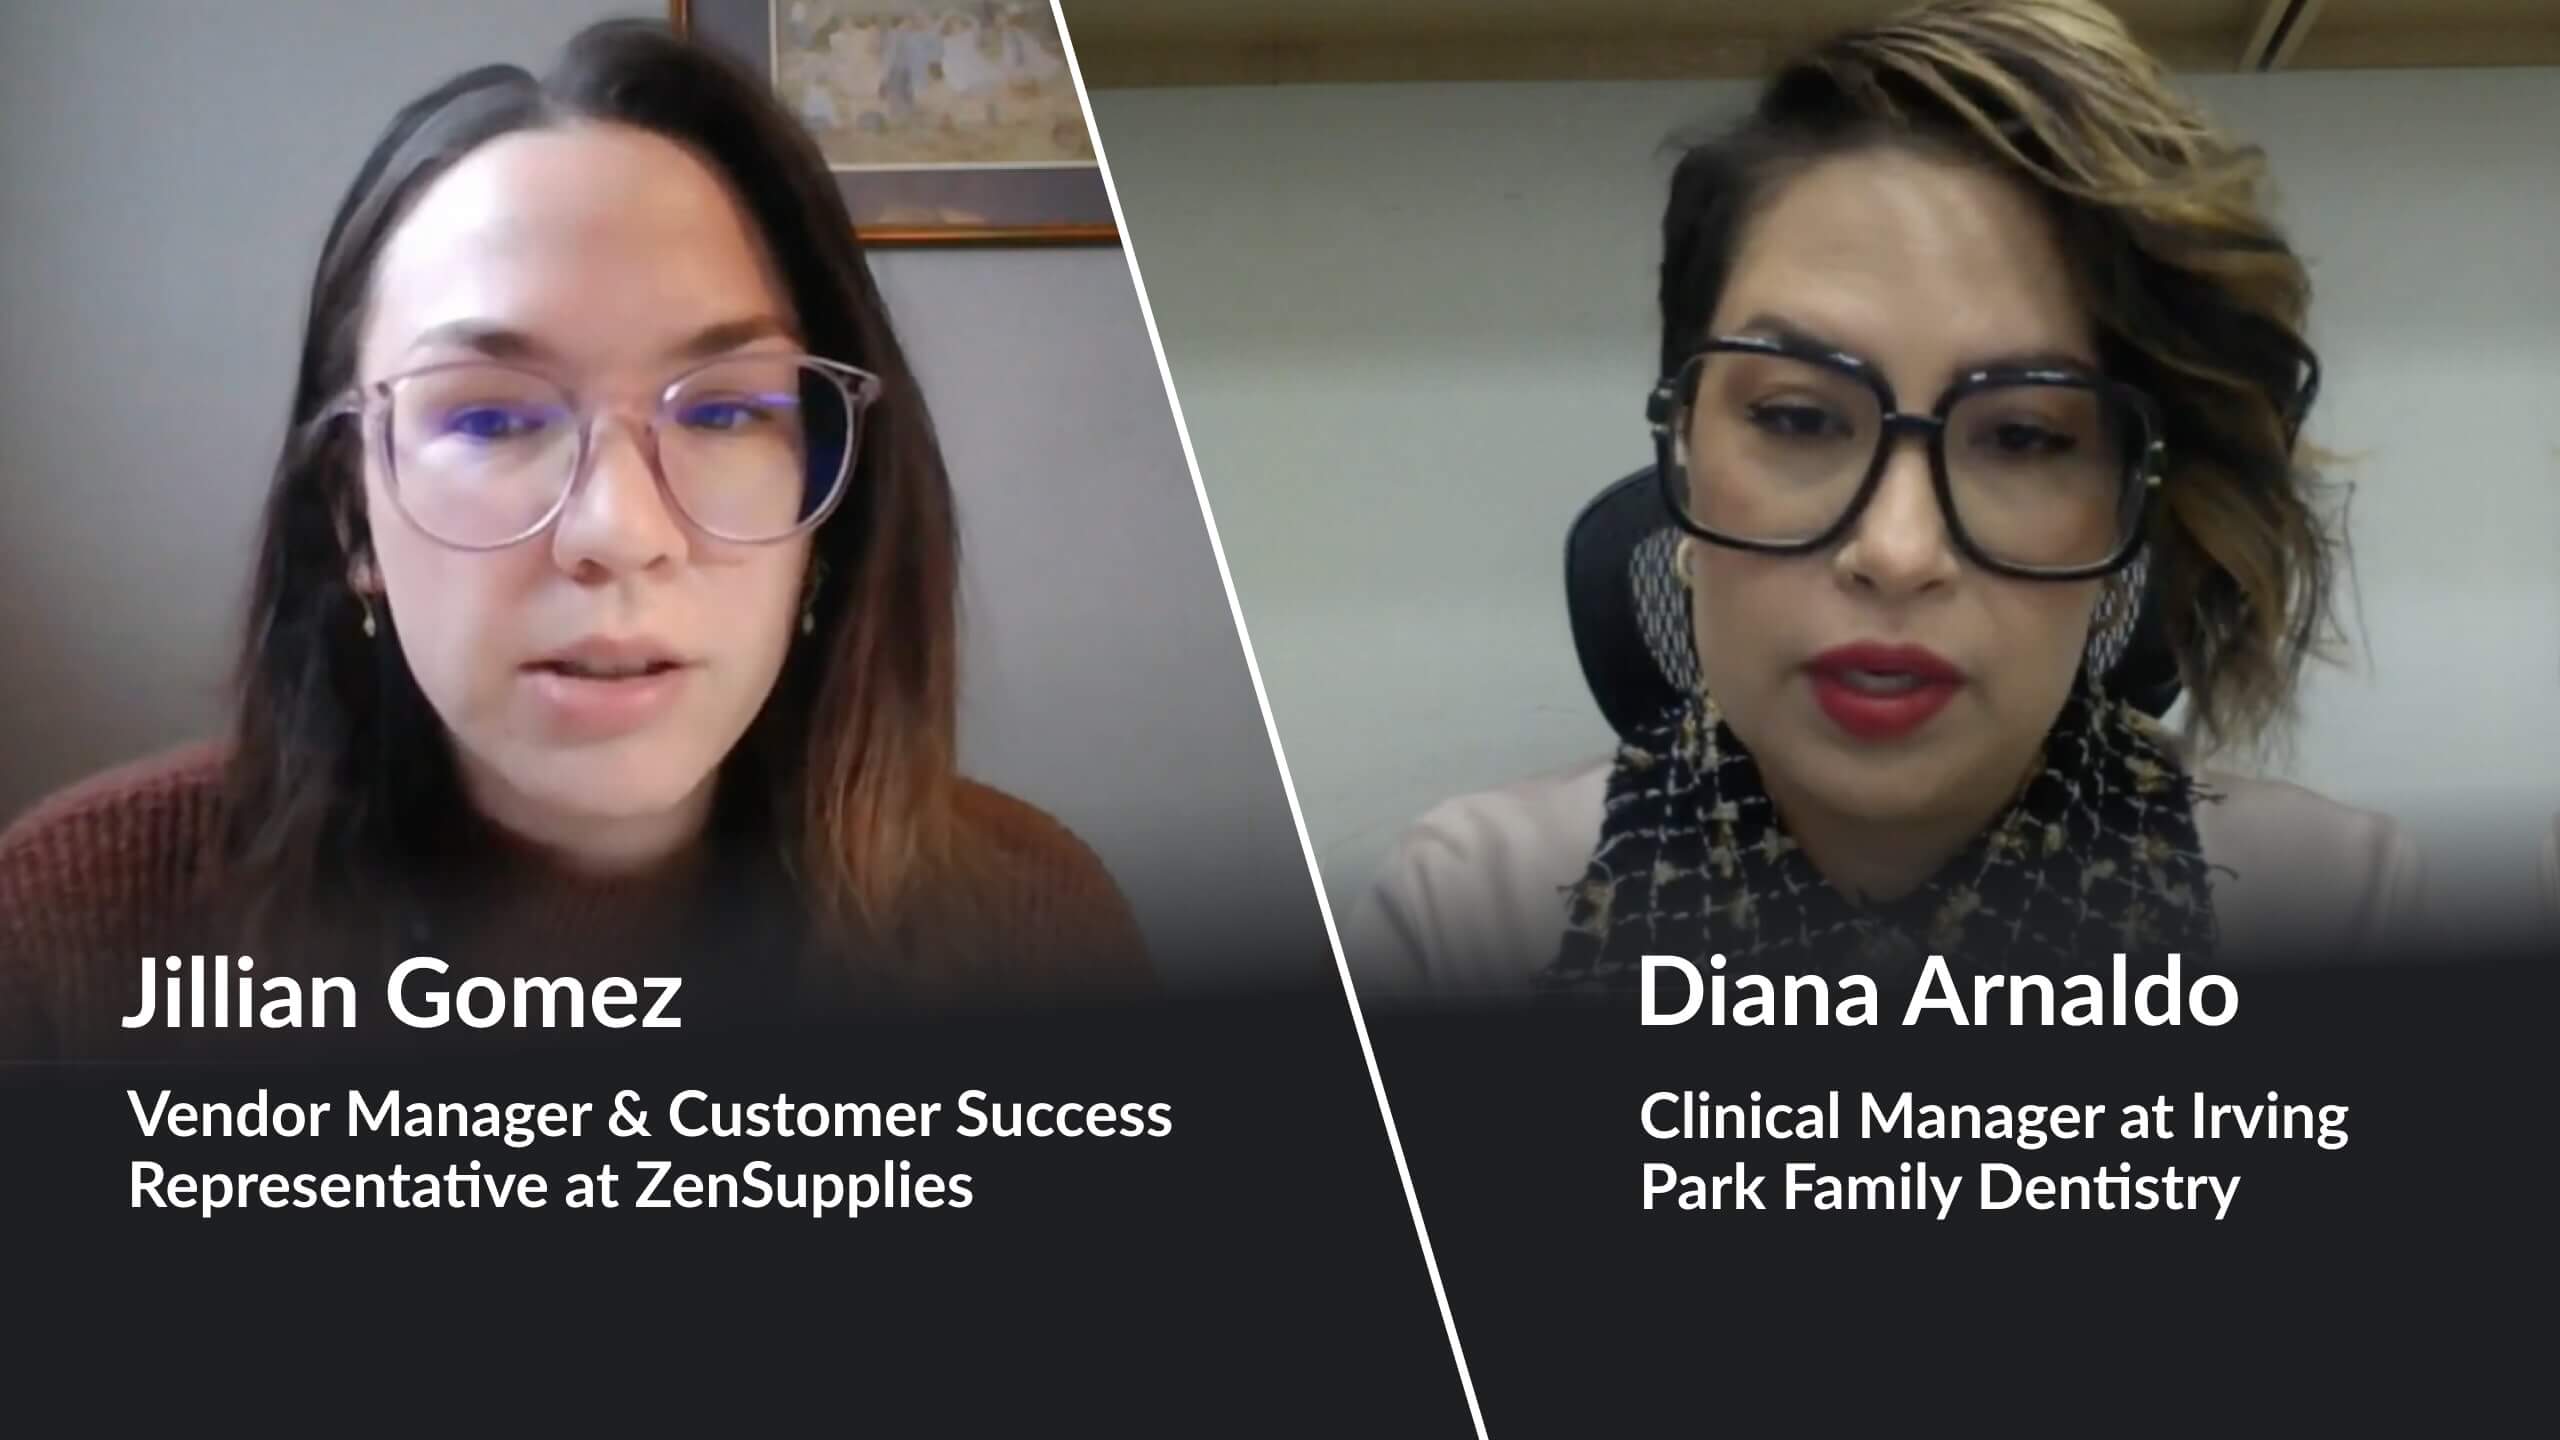 From Dental Assistant to Clinical Manager: The Career Path of Dental Assistants – An Expert Interview with Diana Arnaldo, Clinical Manager at Irving Park Family Dentistry